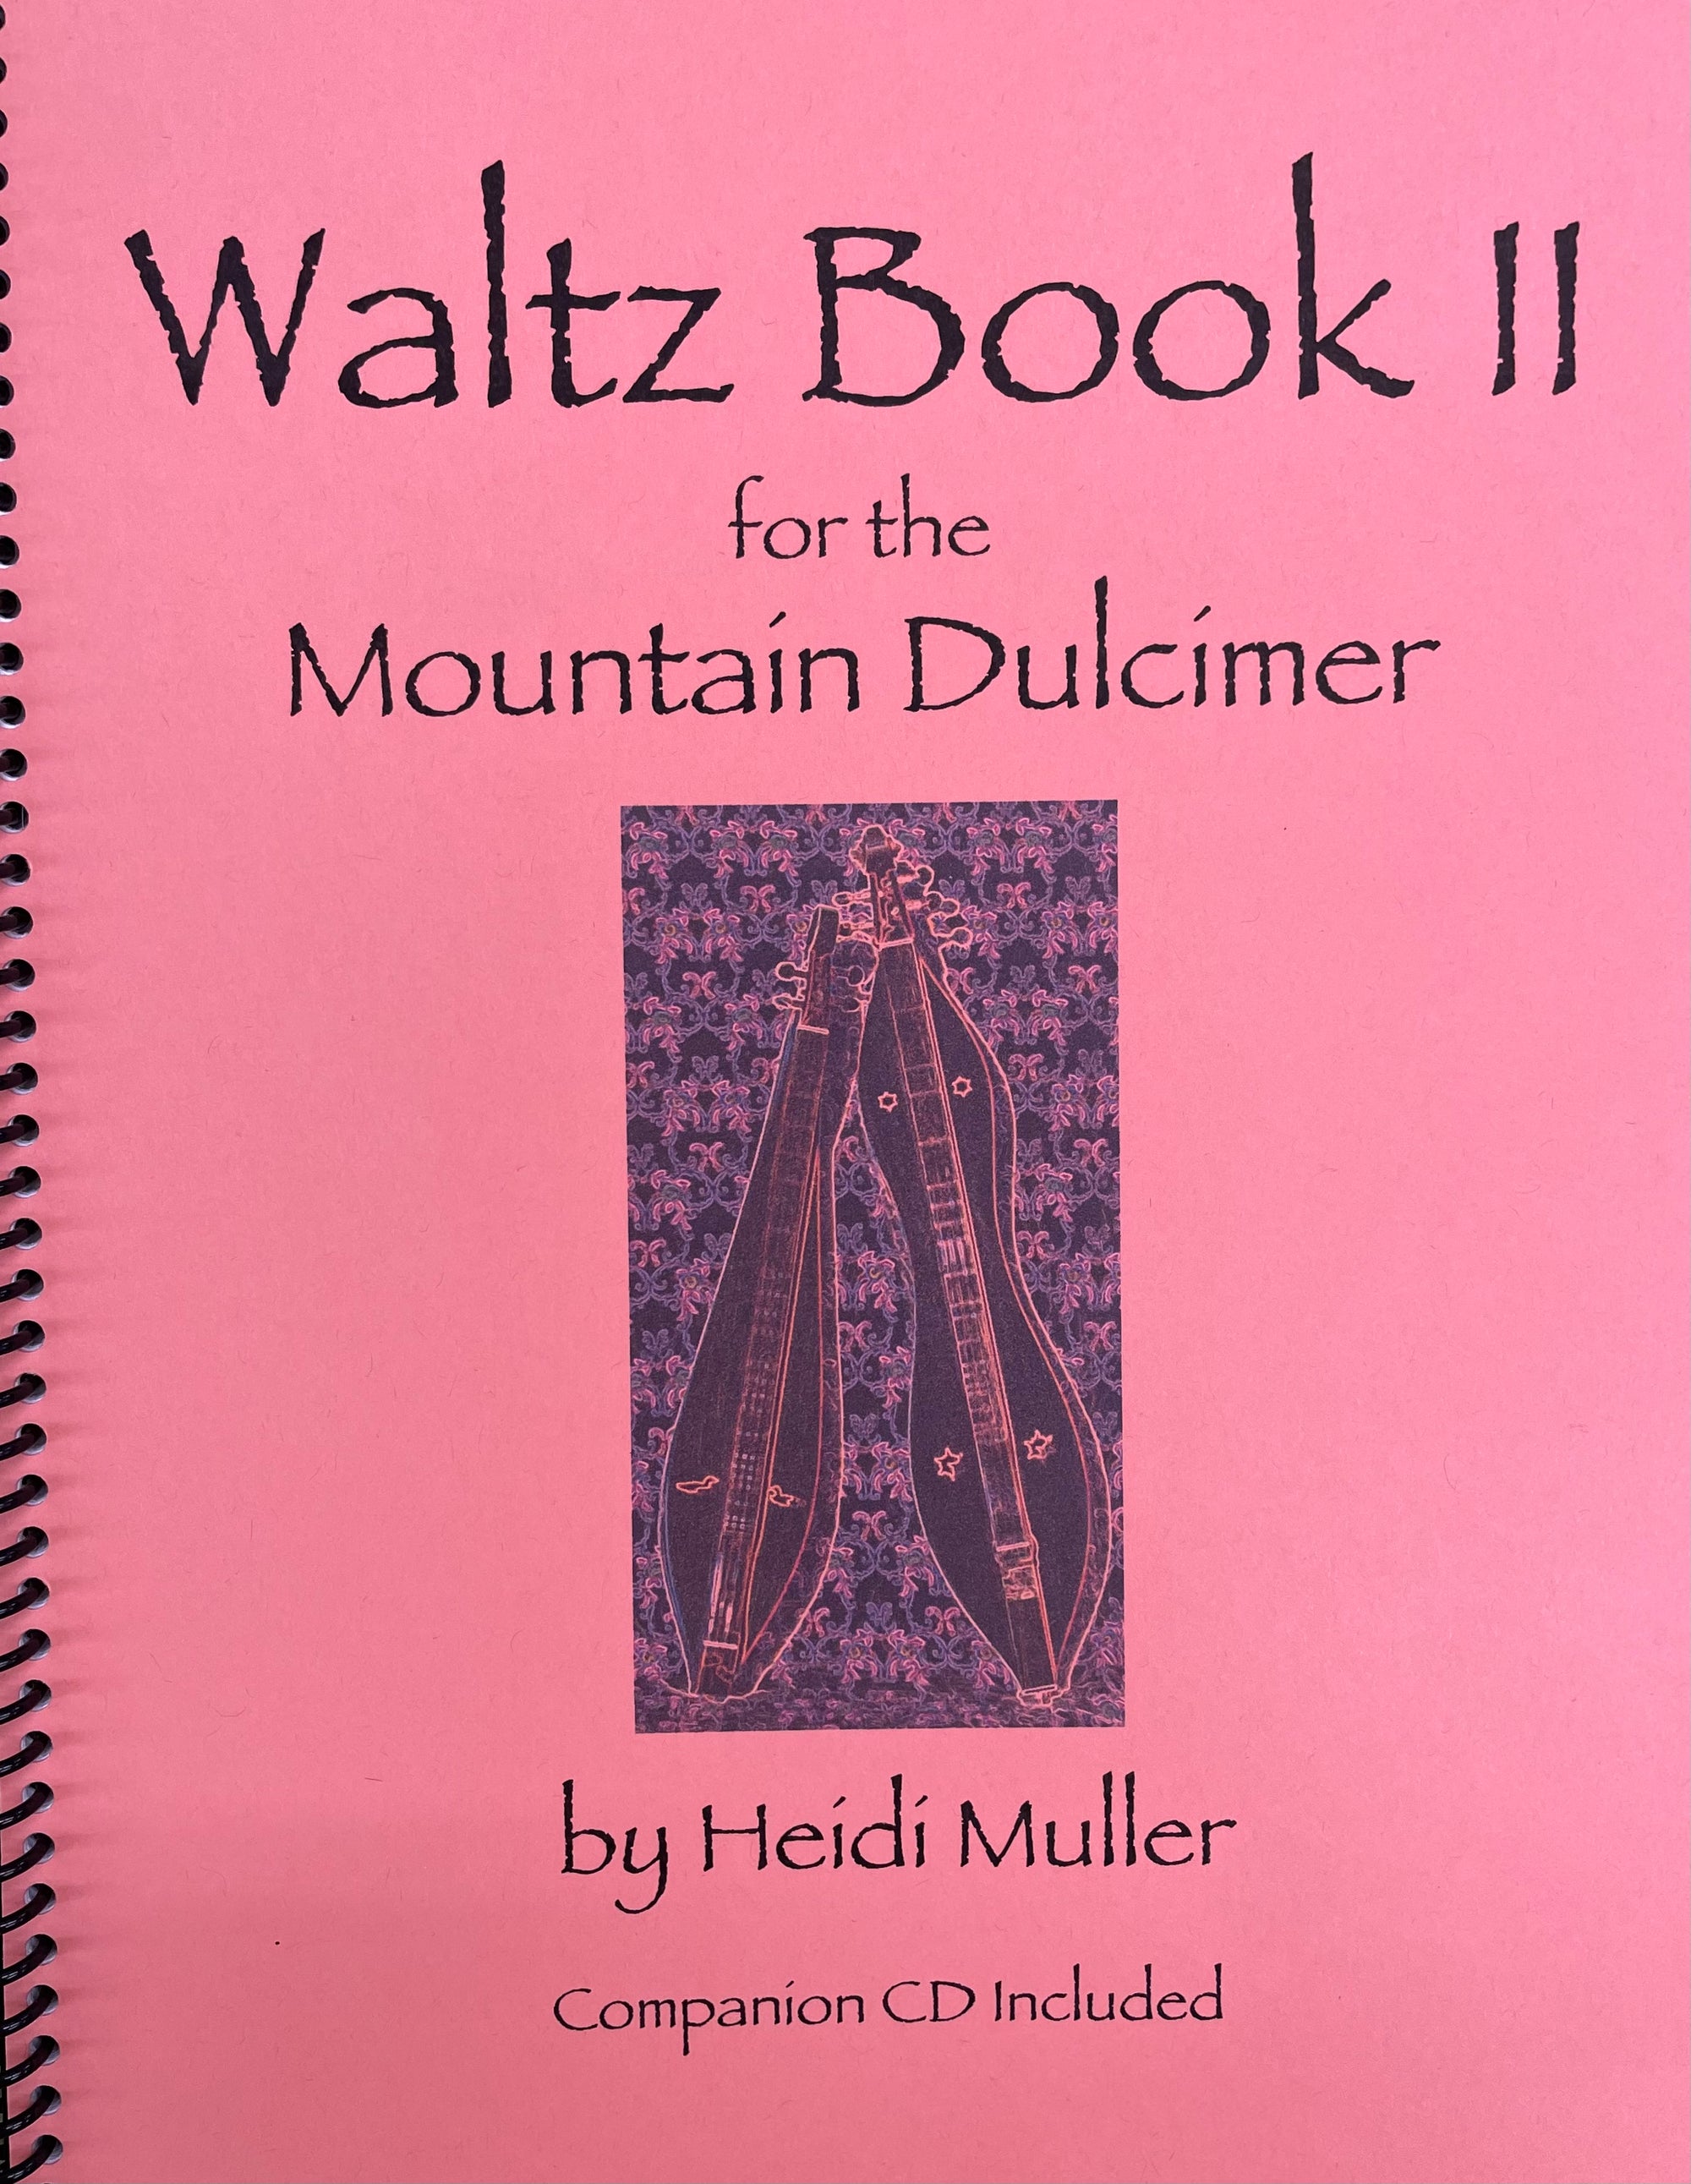 Pink cover of Waltz Book II for the Mountain Dulcimer by Heidi Muller featuring a stylized image of a mountain dulcimer and the text "Companion CD Included.